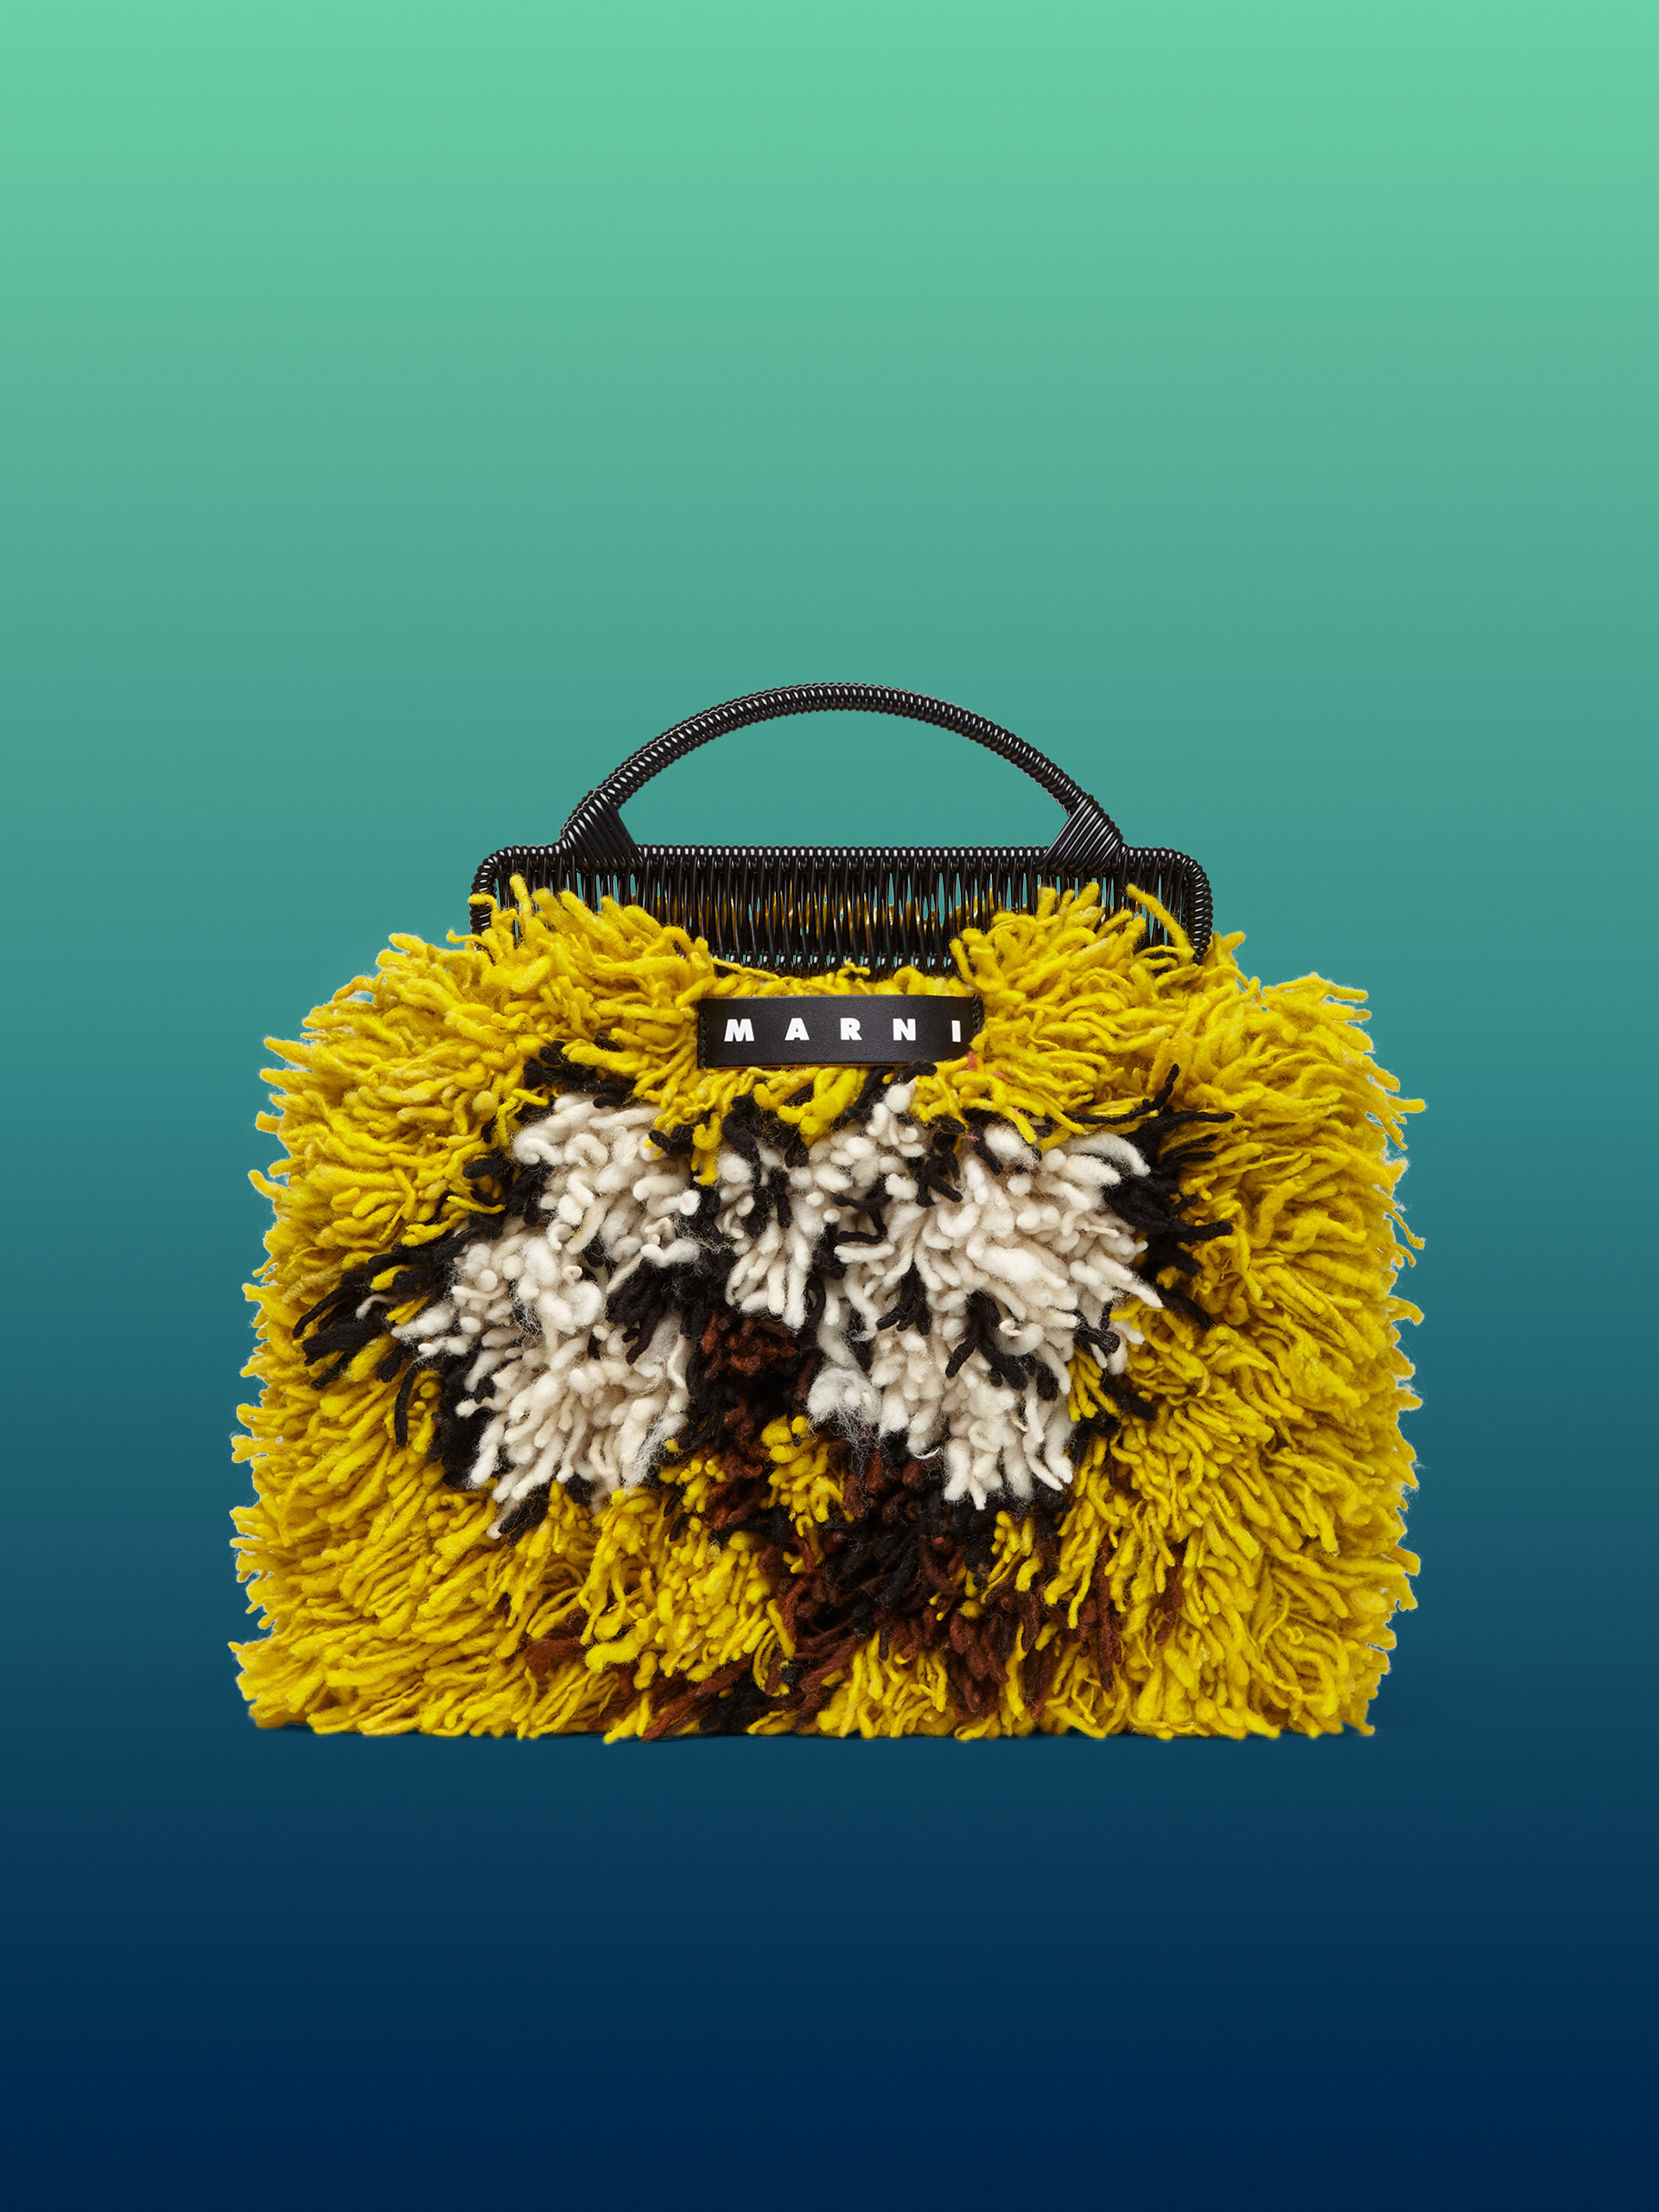 MARNI MARKET multicoloured frame bag in yellow brown and white long wool - Furniture - Image 1